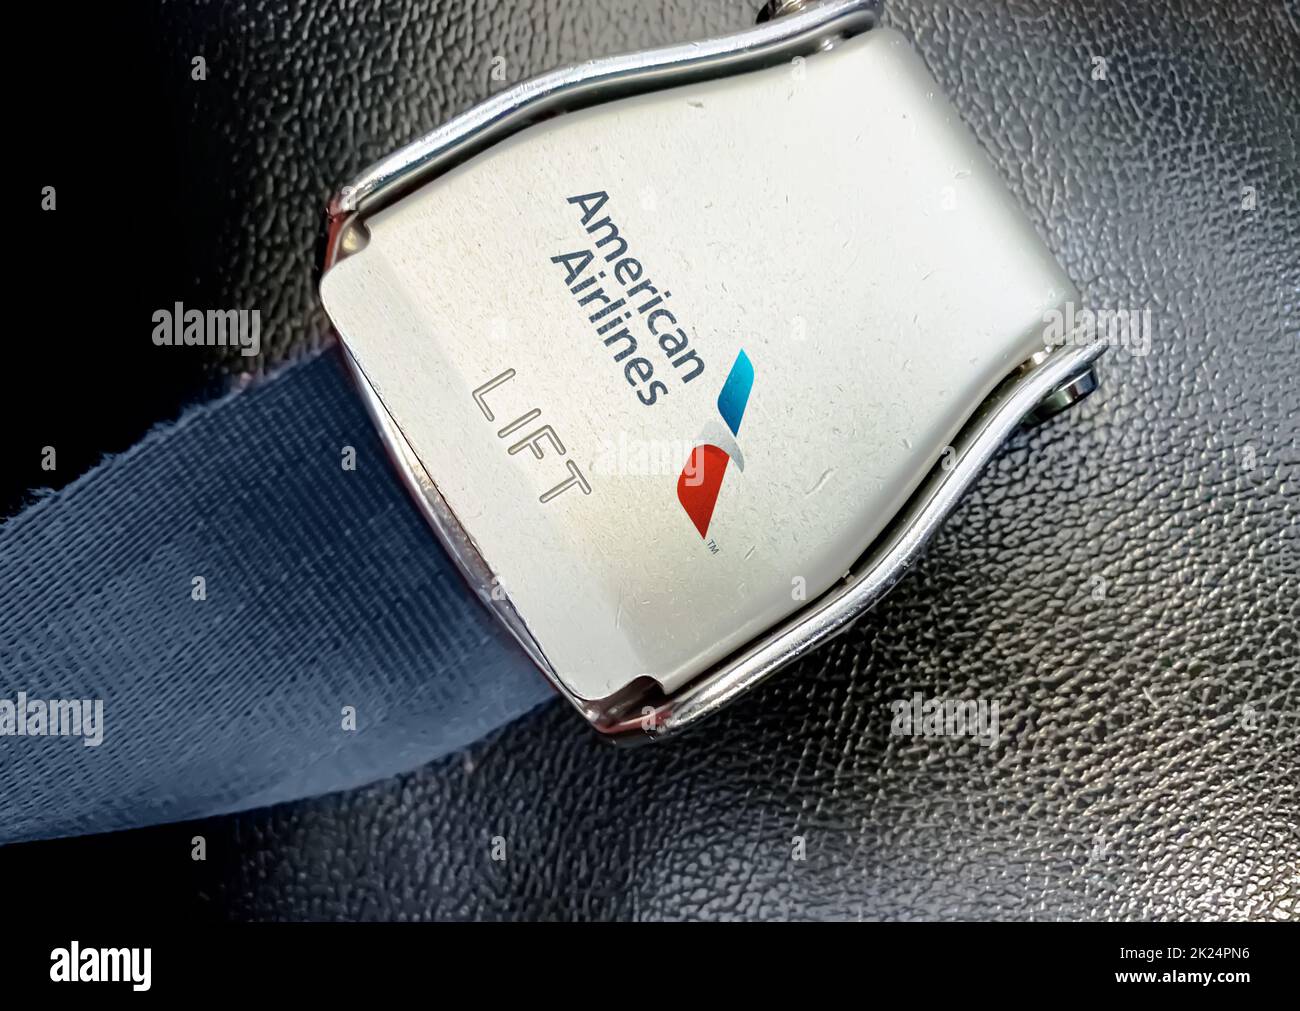 New York, USA, July 2020: belt of an empty seat inside an airplane with the American Airlines logo printed on the metal. Travel and airport security Stock Photo